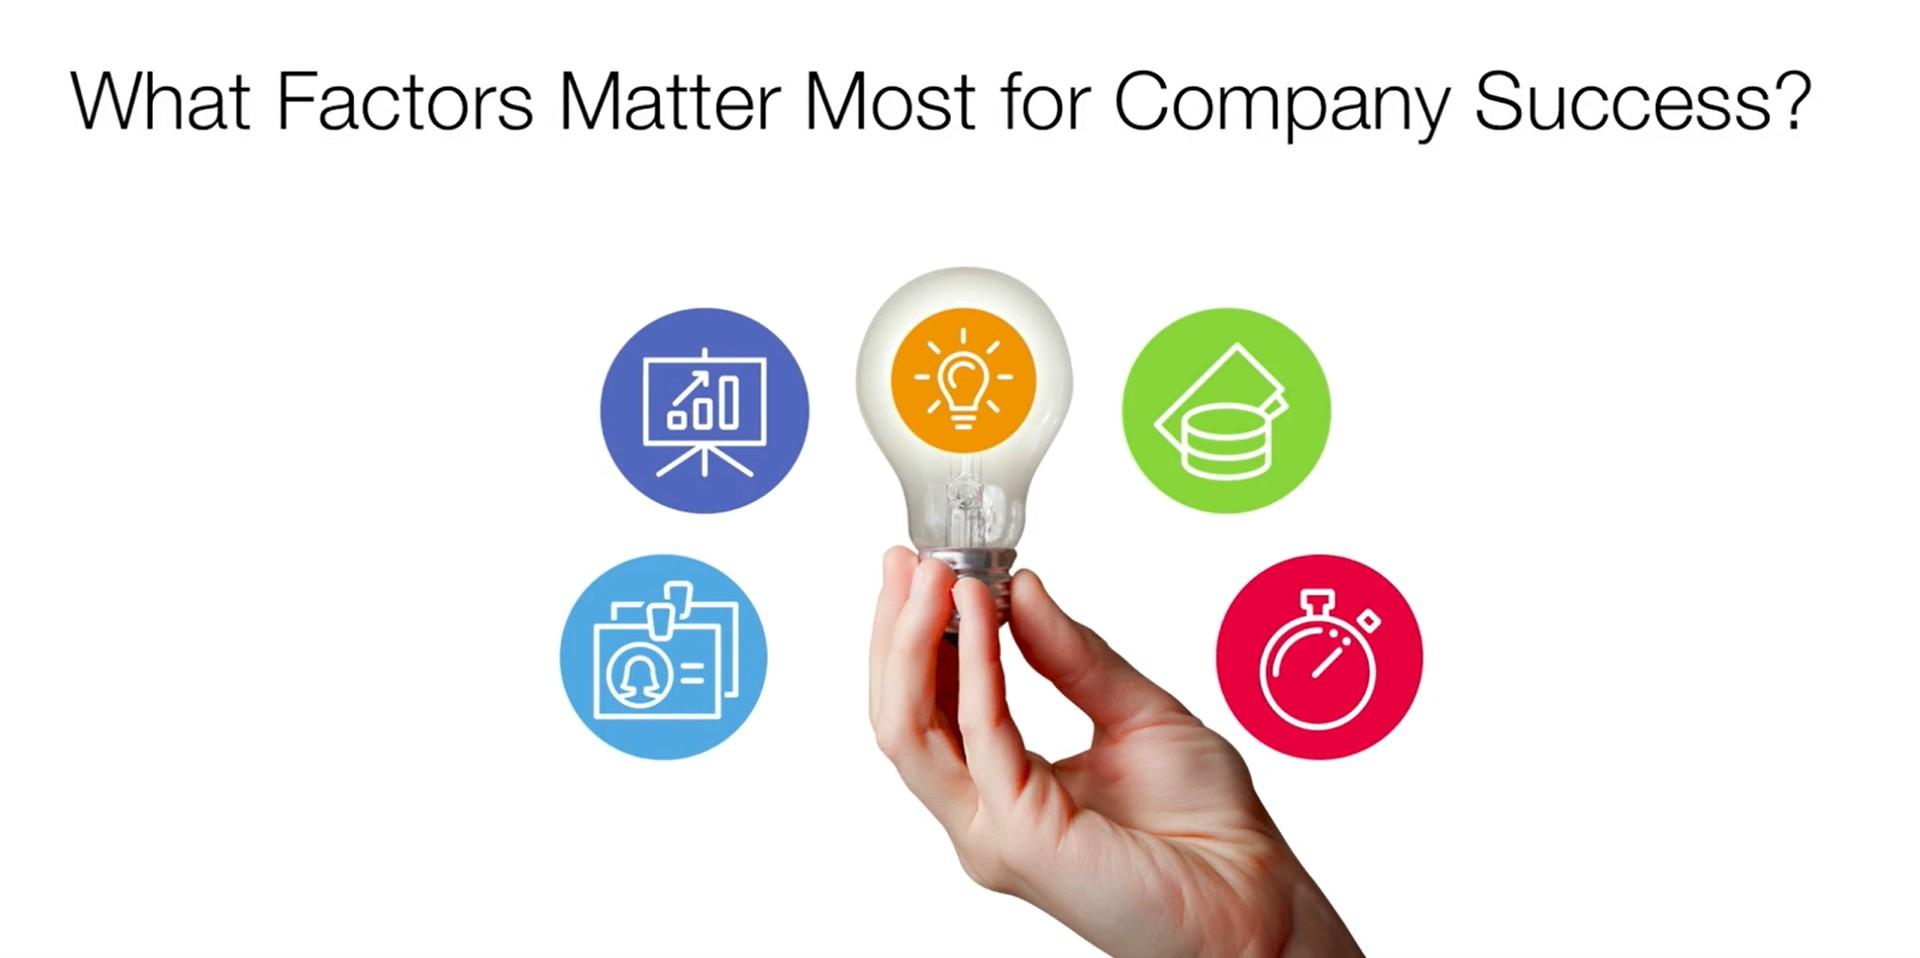 What Factors Matter Most for Company Success?